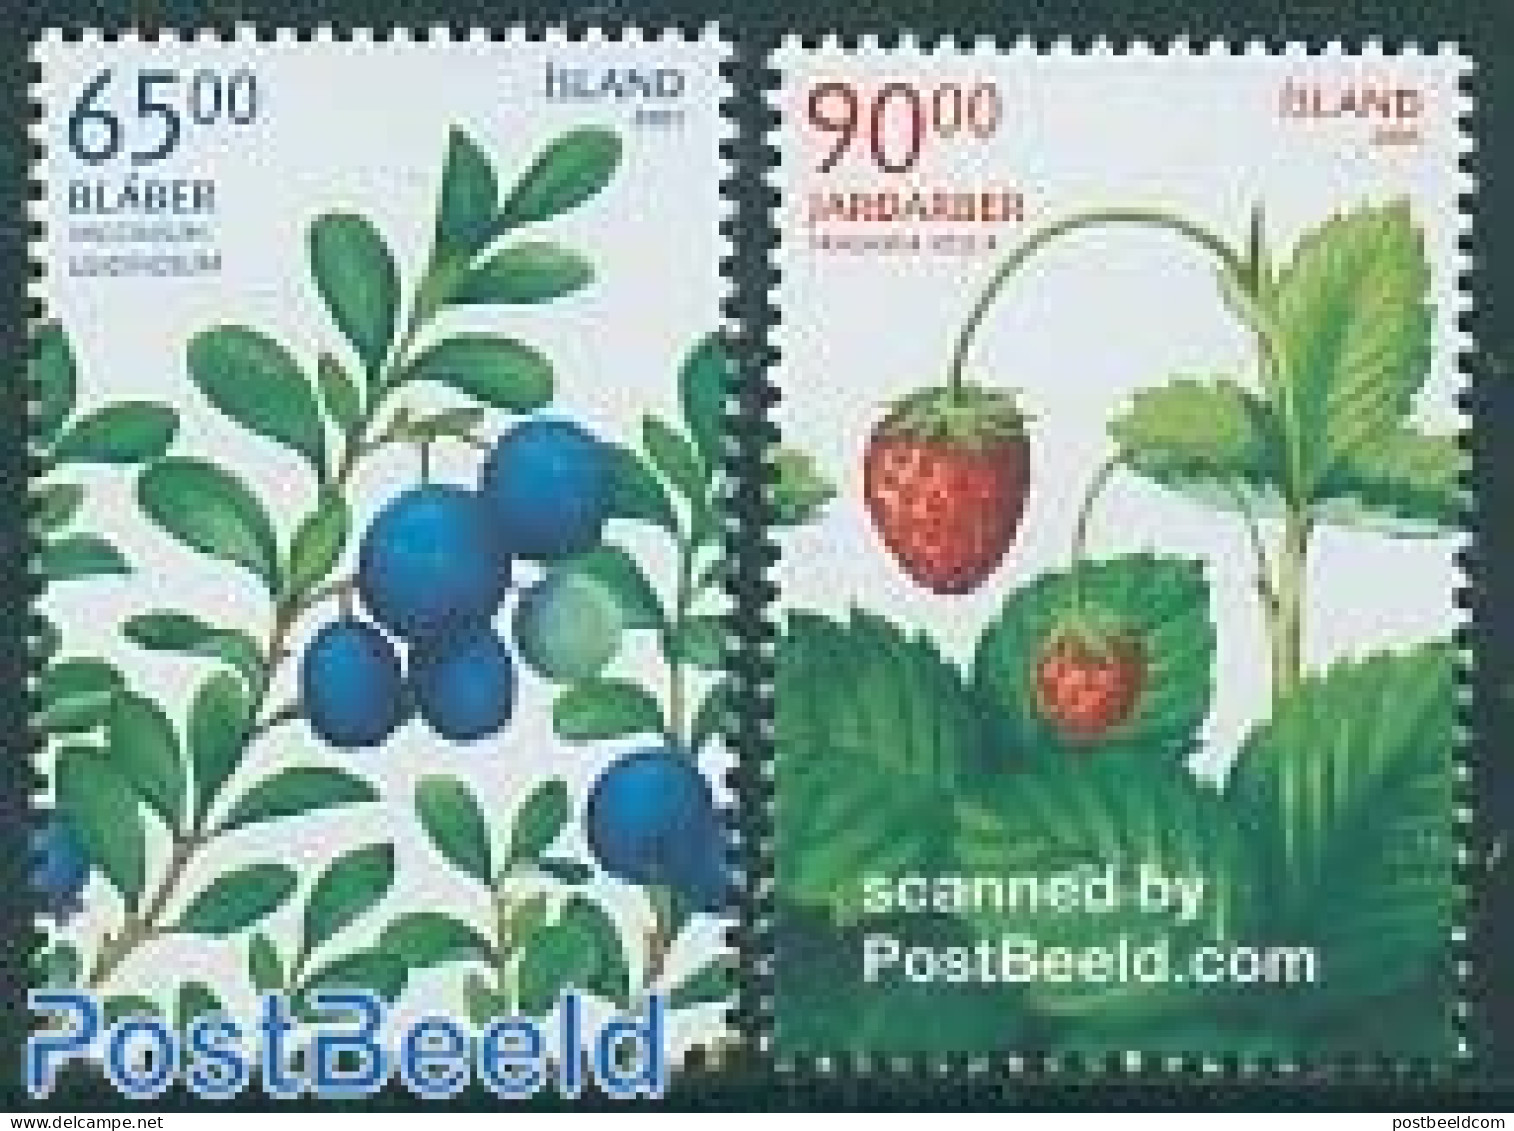 Iceland 2005 Wild Berries 2v, Mint NH, Nature - Fruit - Nuevos